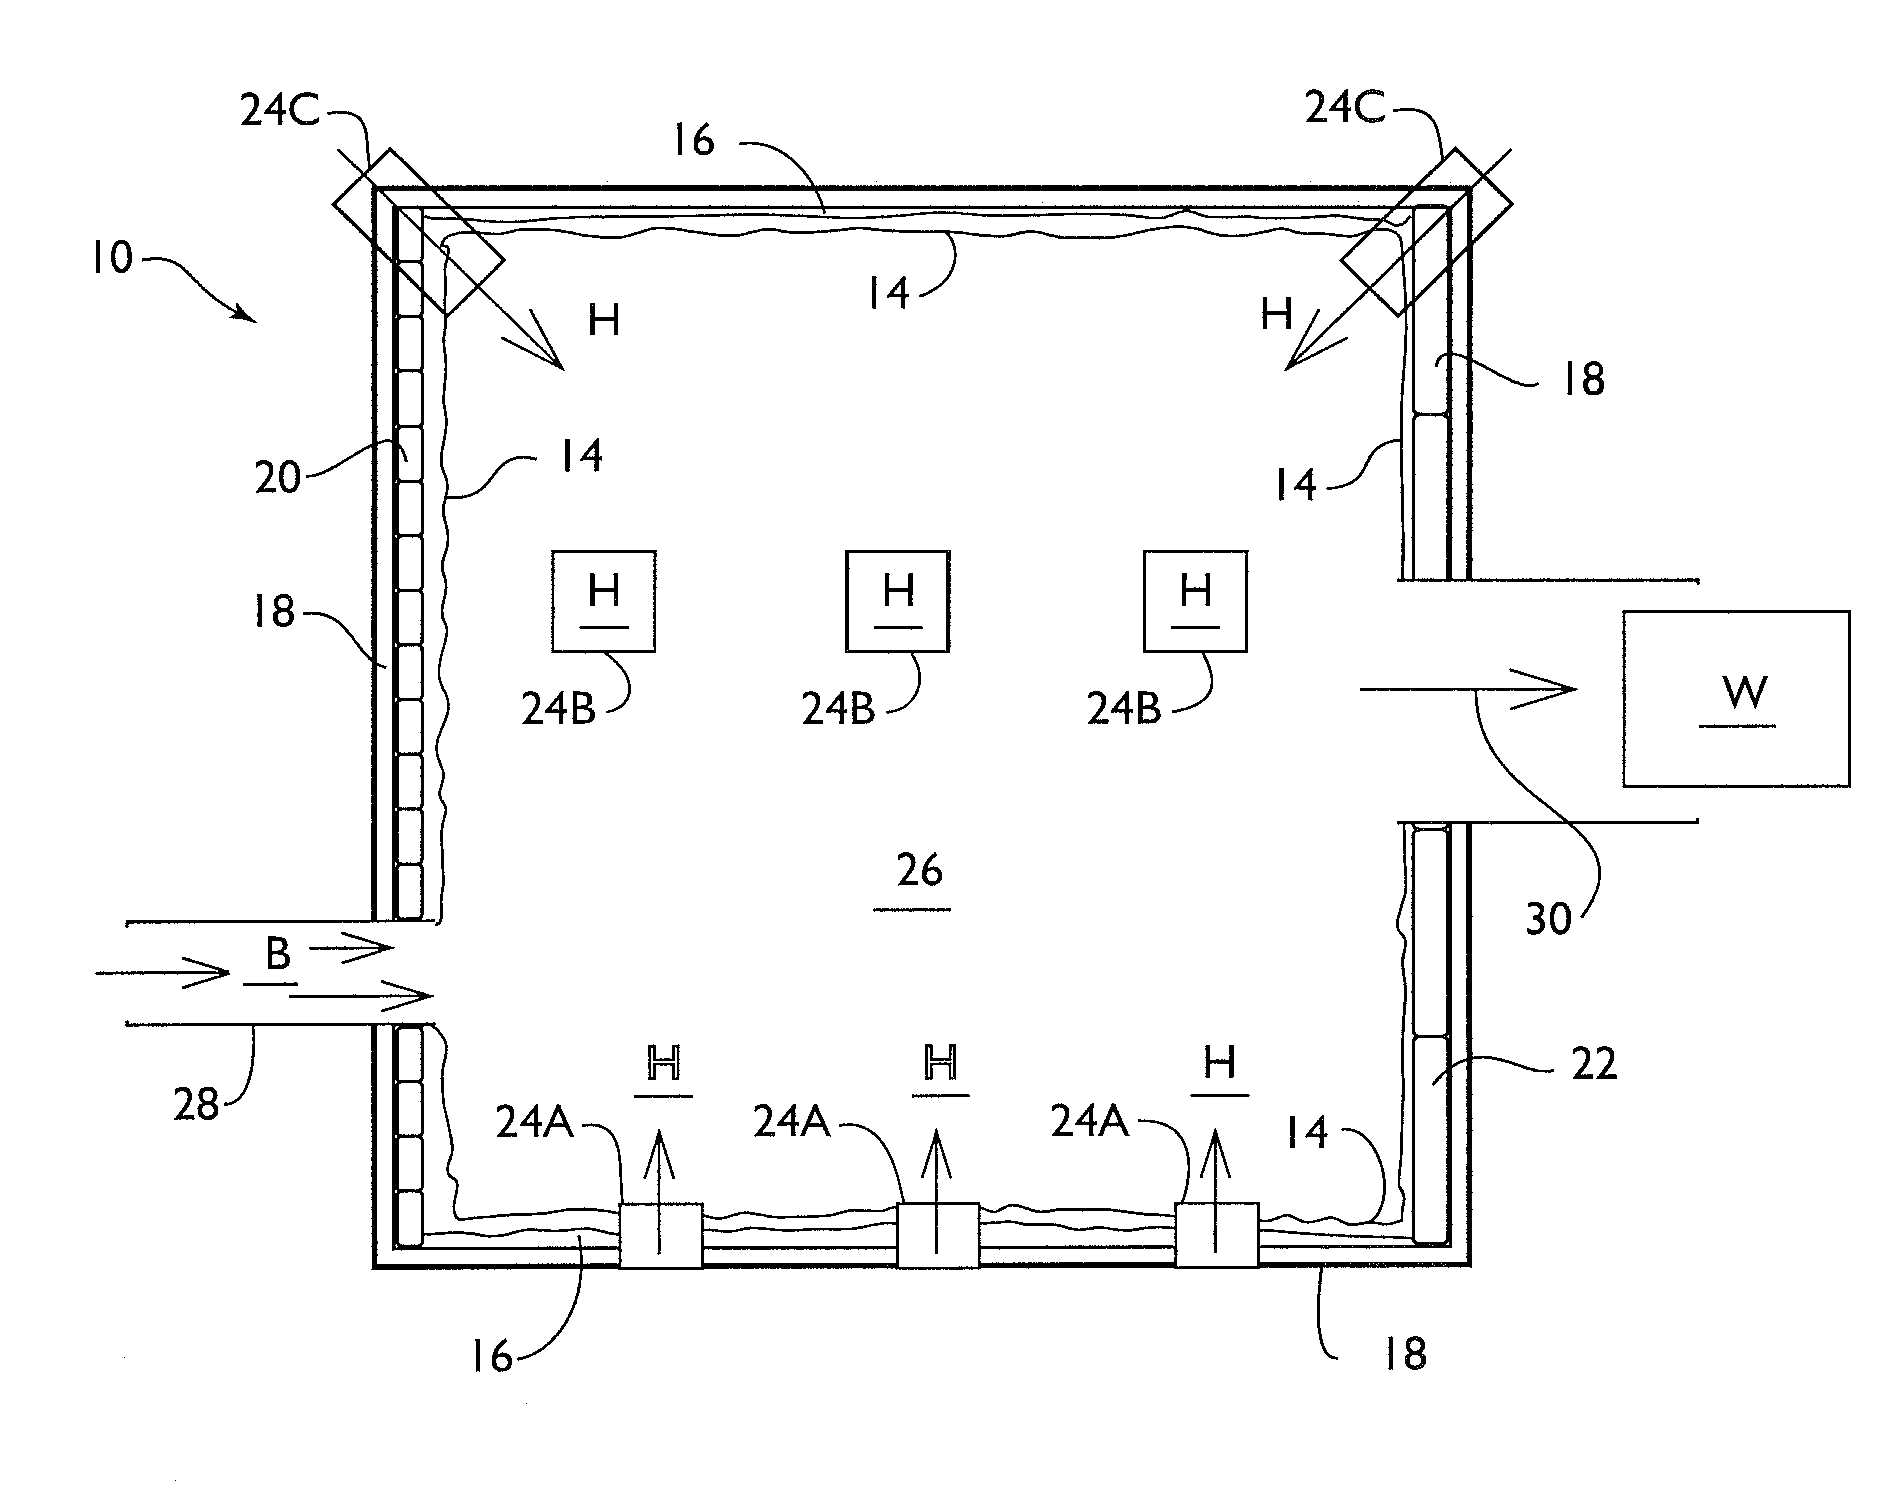 Biomass Combustion Chamber and Refractory Components